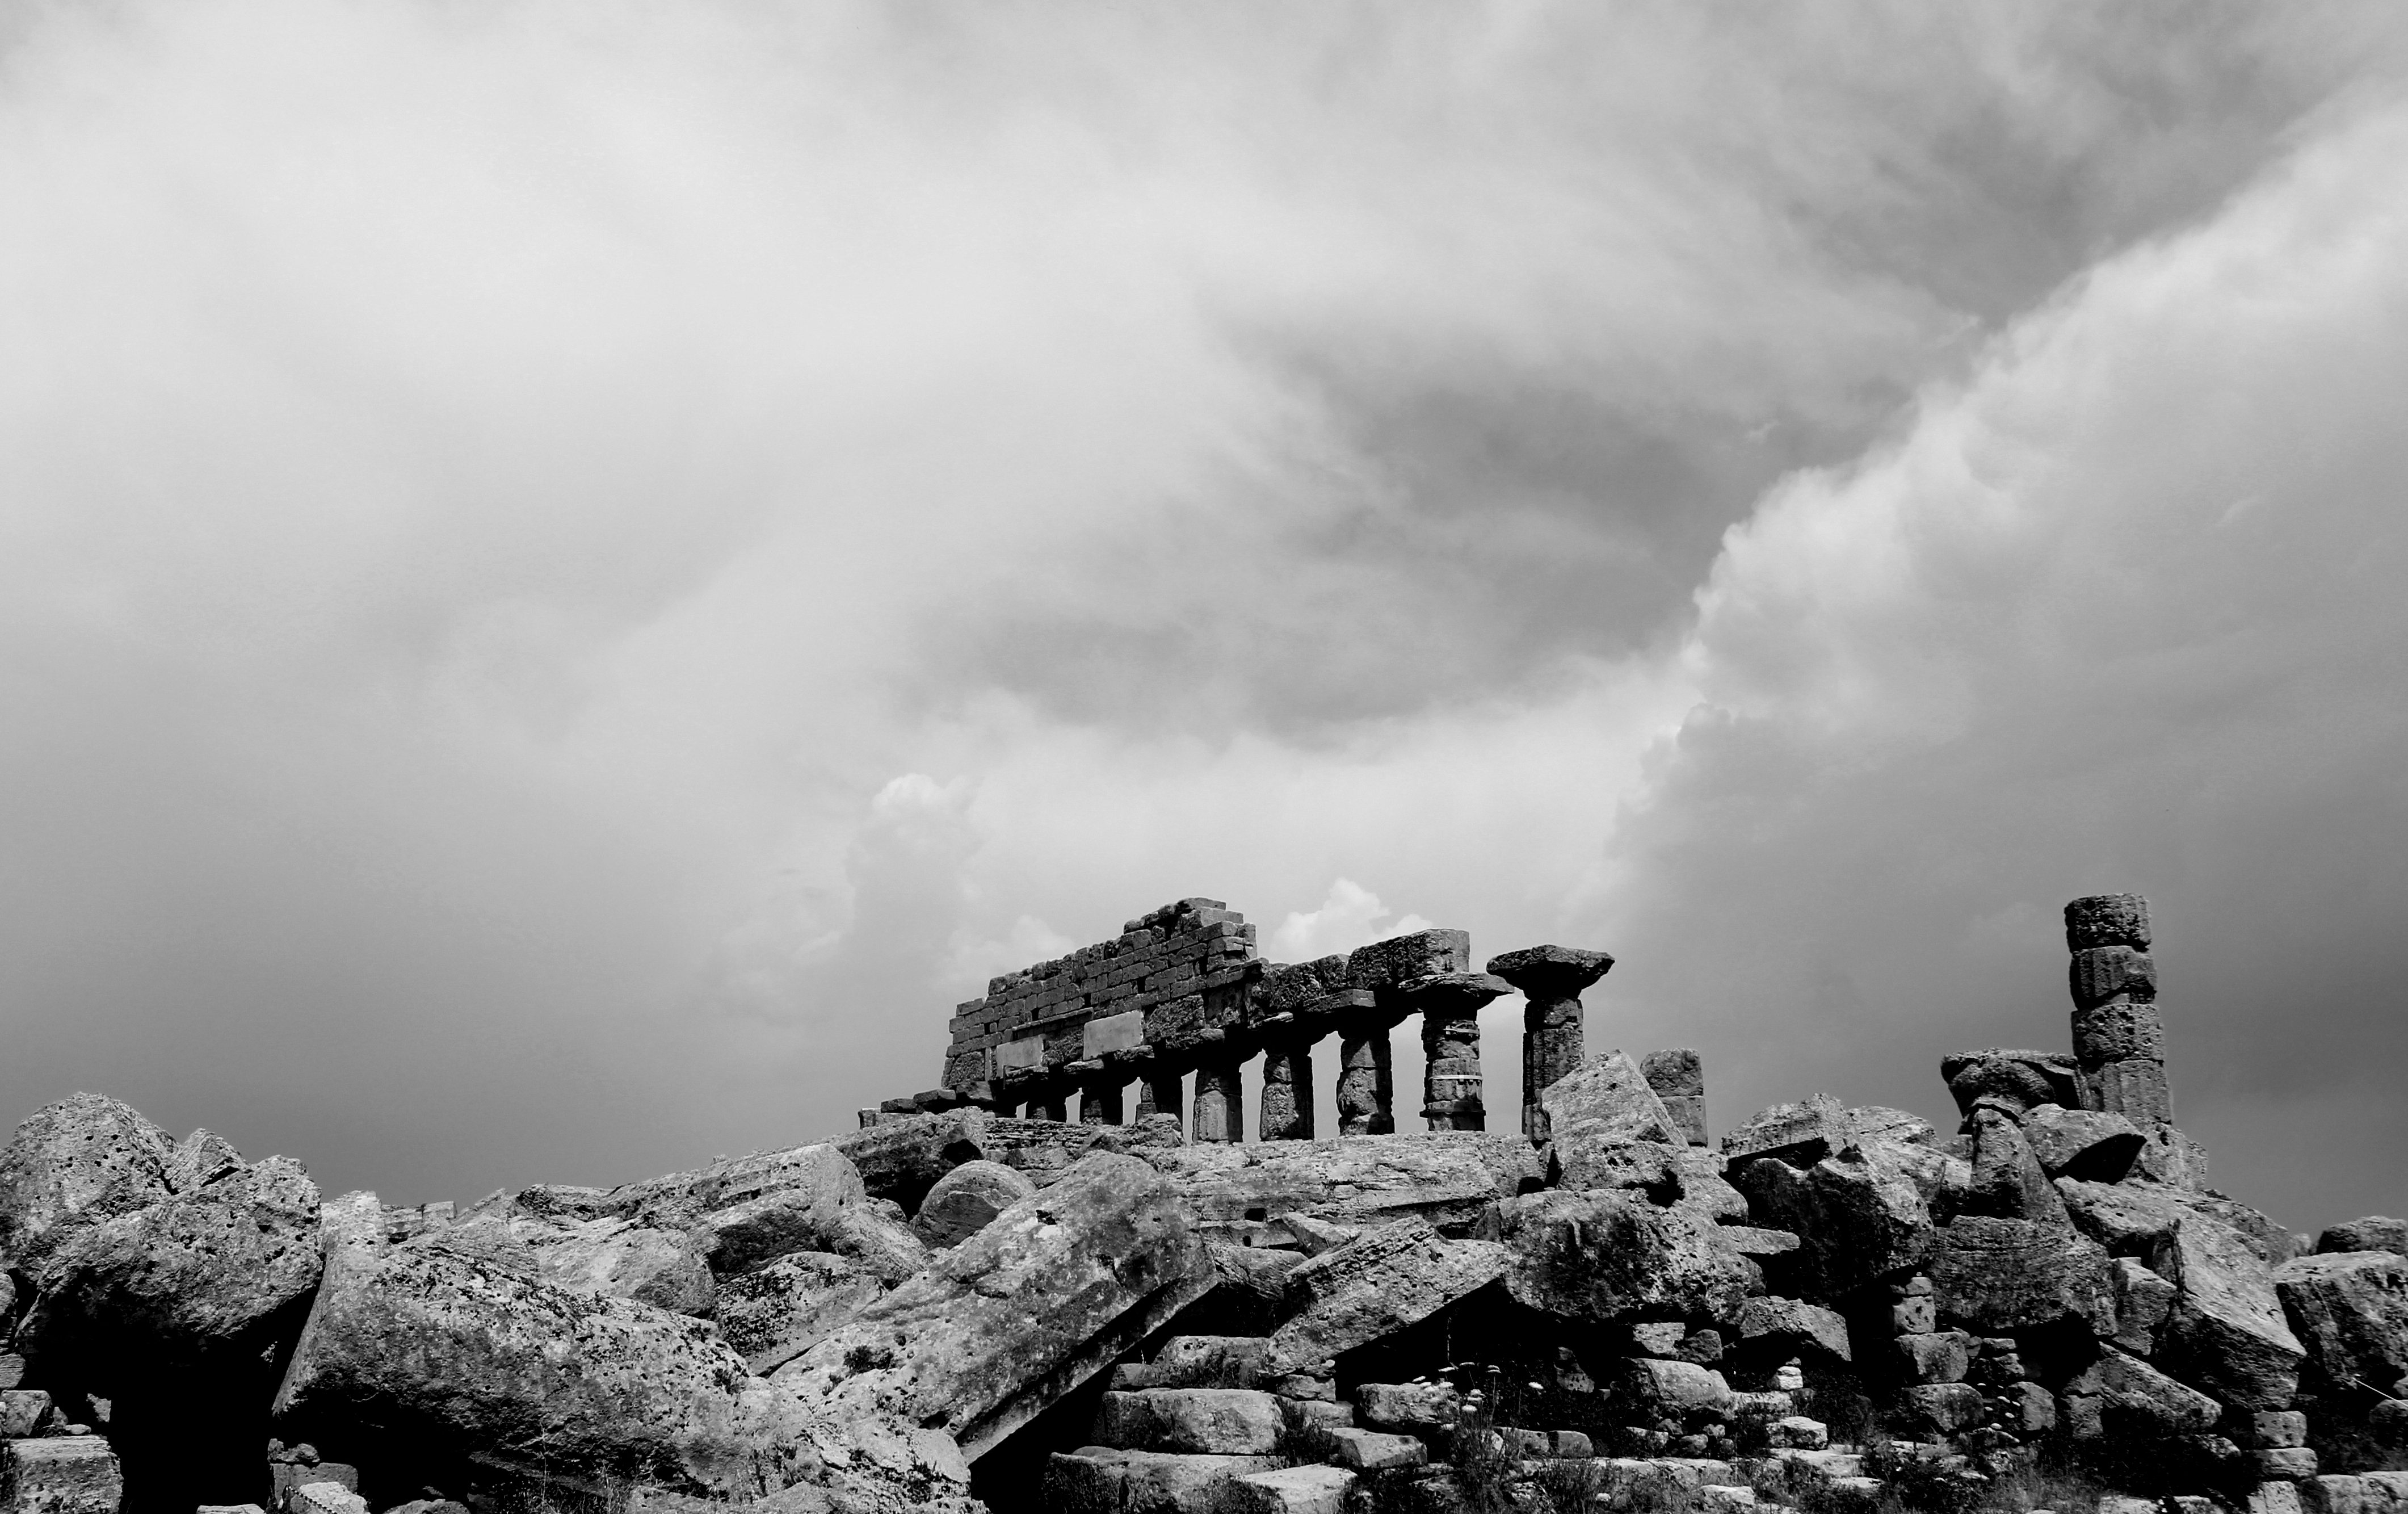 A black and white image of the ruins at Selinunte in Sicily, Italy.